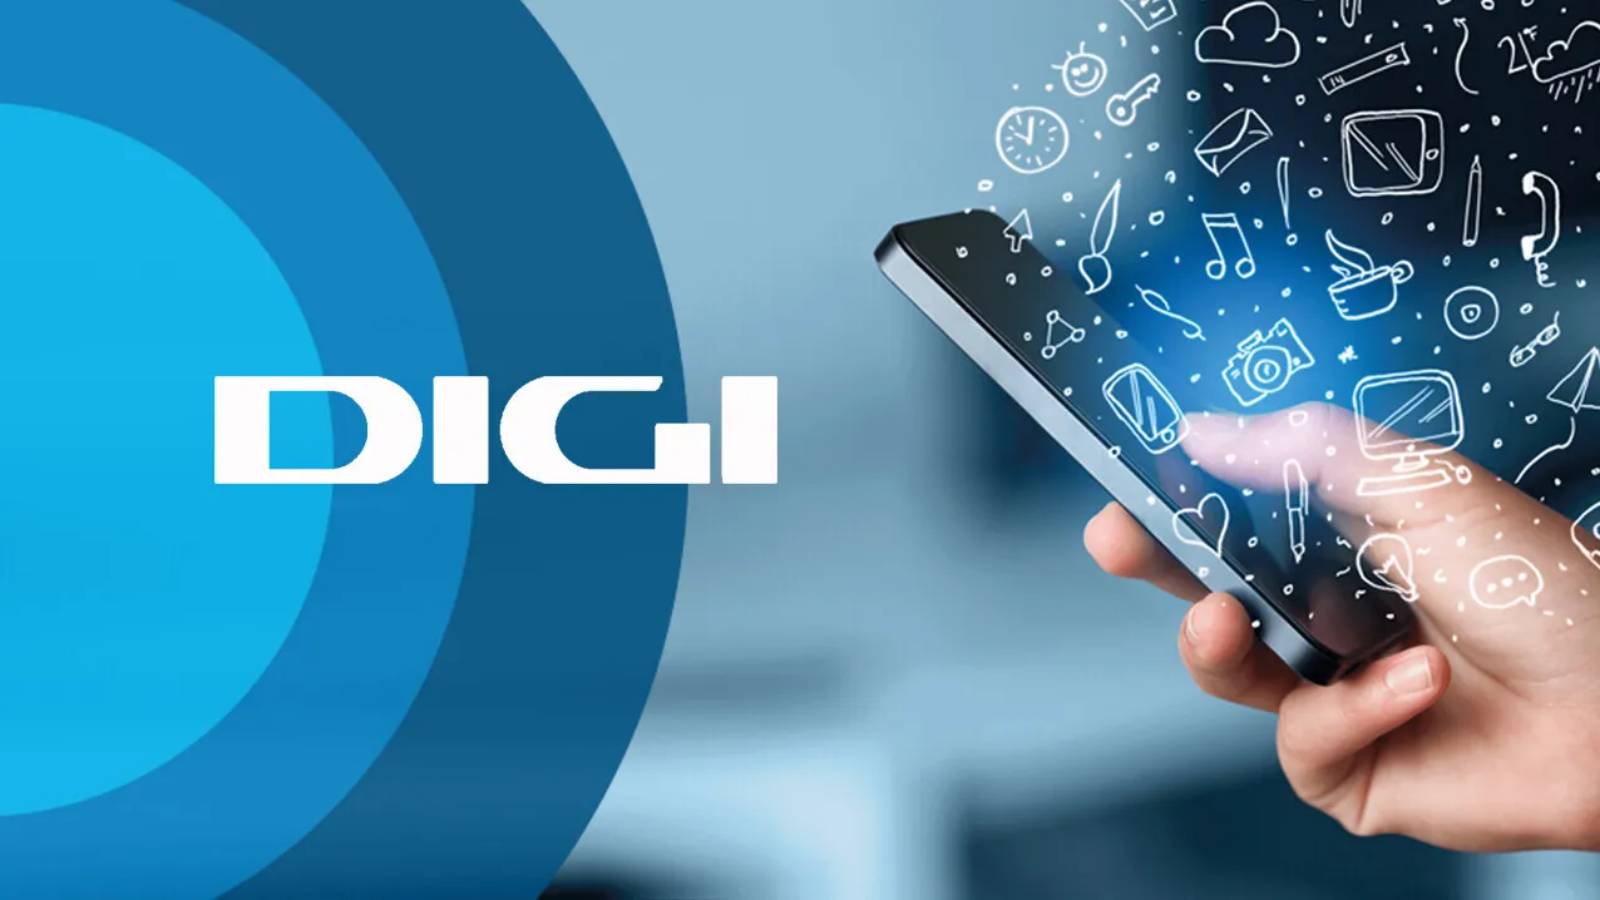 DIGI Romania Officially Informs Romanians HALF Price Time 6 MONTHS